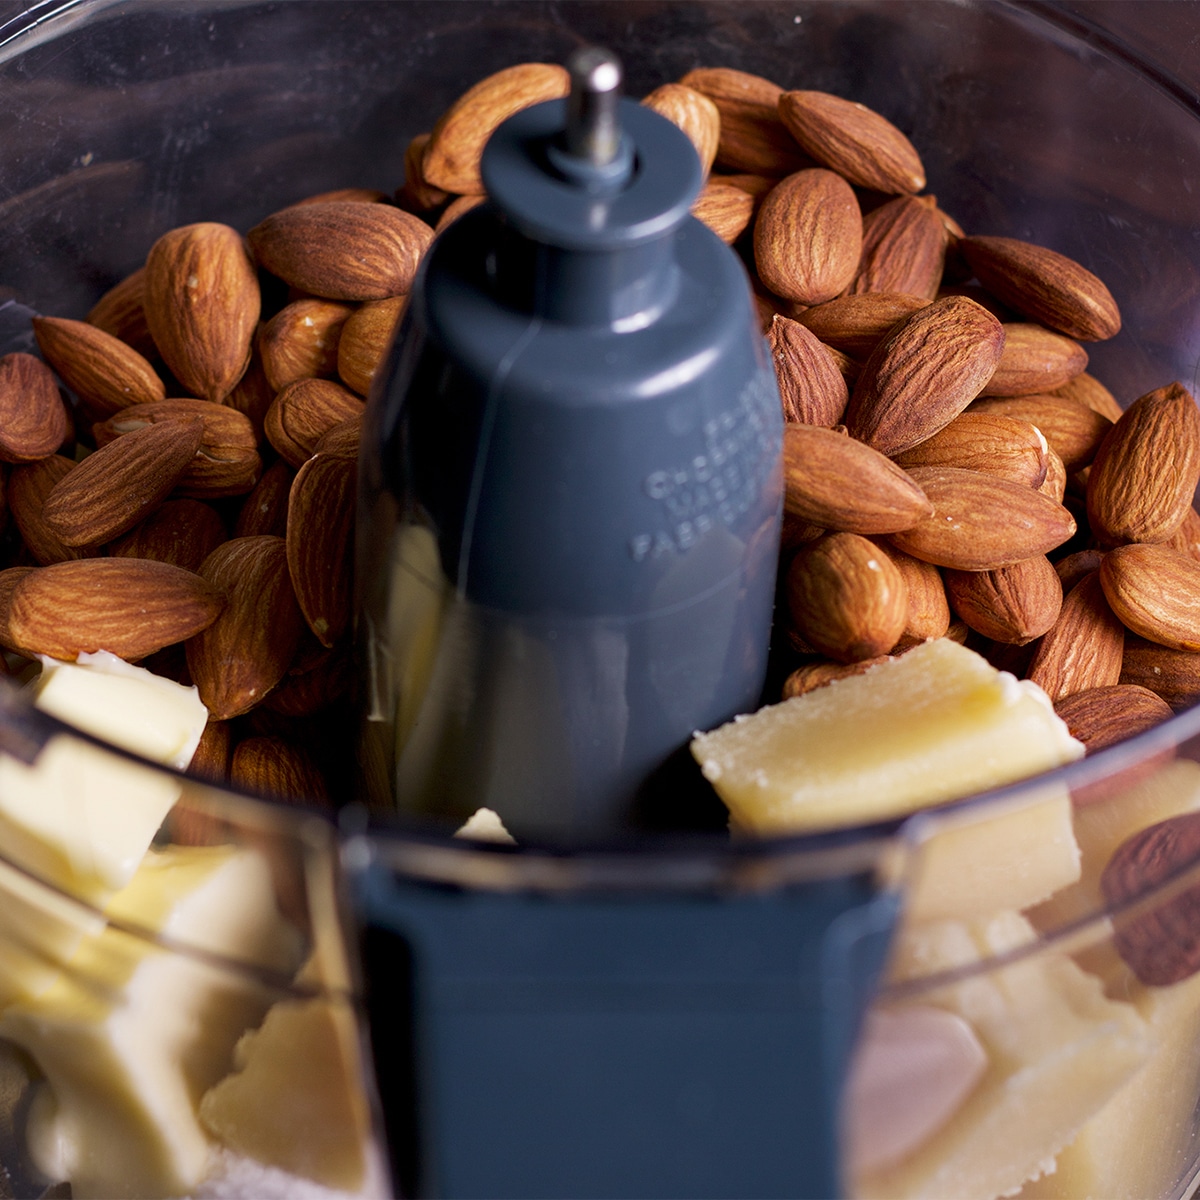 The bowl of a food processor that contains freshly made frangipane.